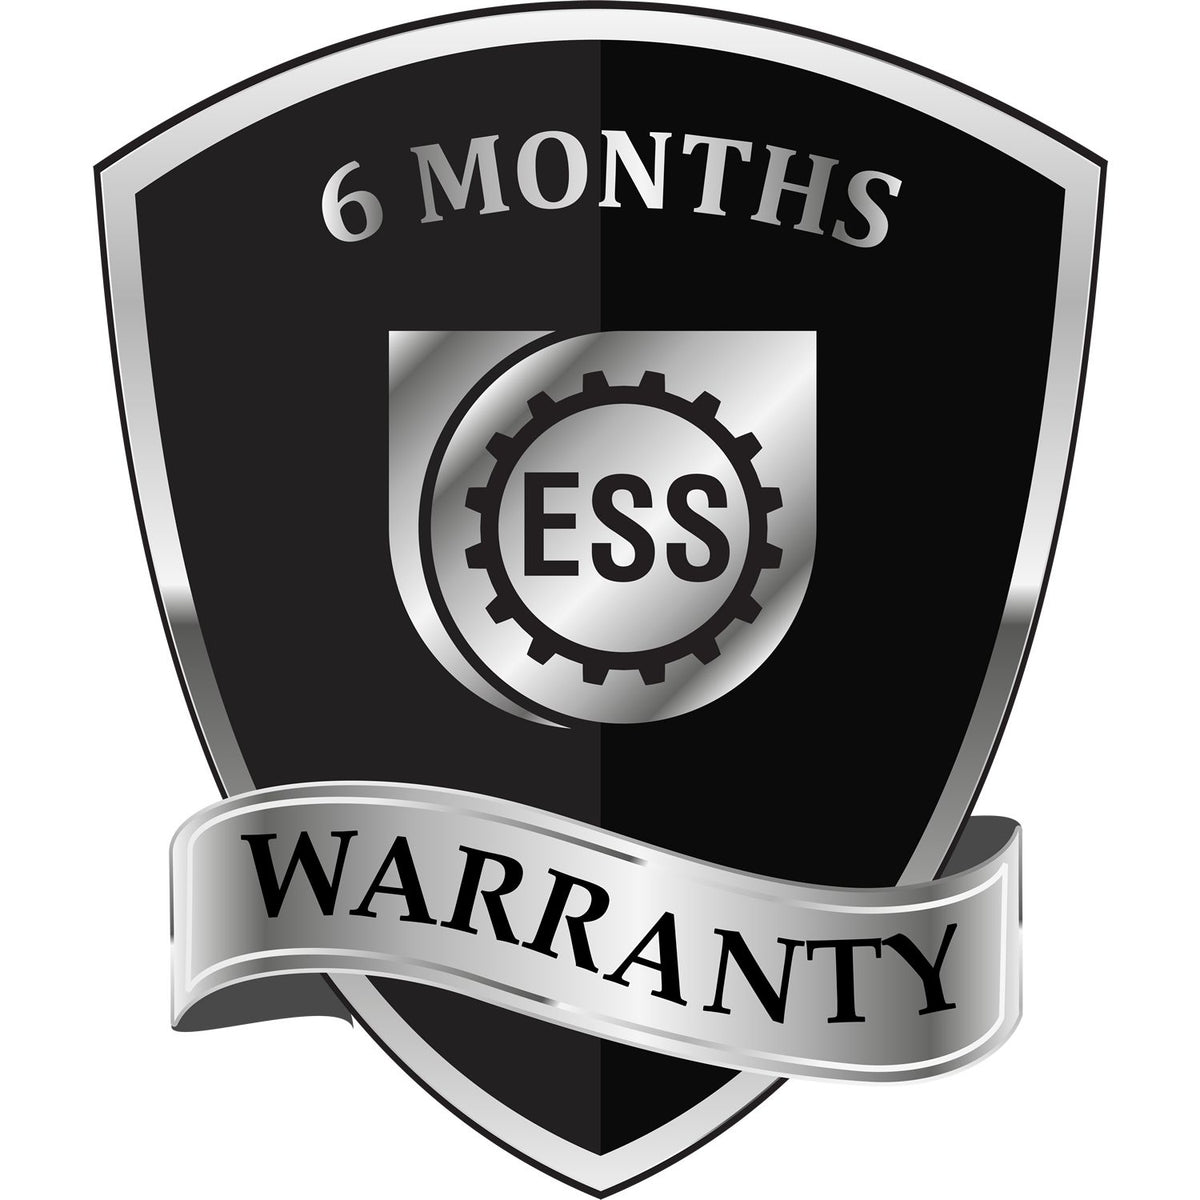 A badge or emblem showing a warranty icon for the Premium MaxLight Pre-Inked Georgia Engineering Stamp